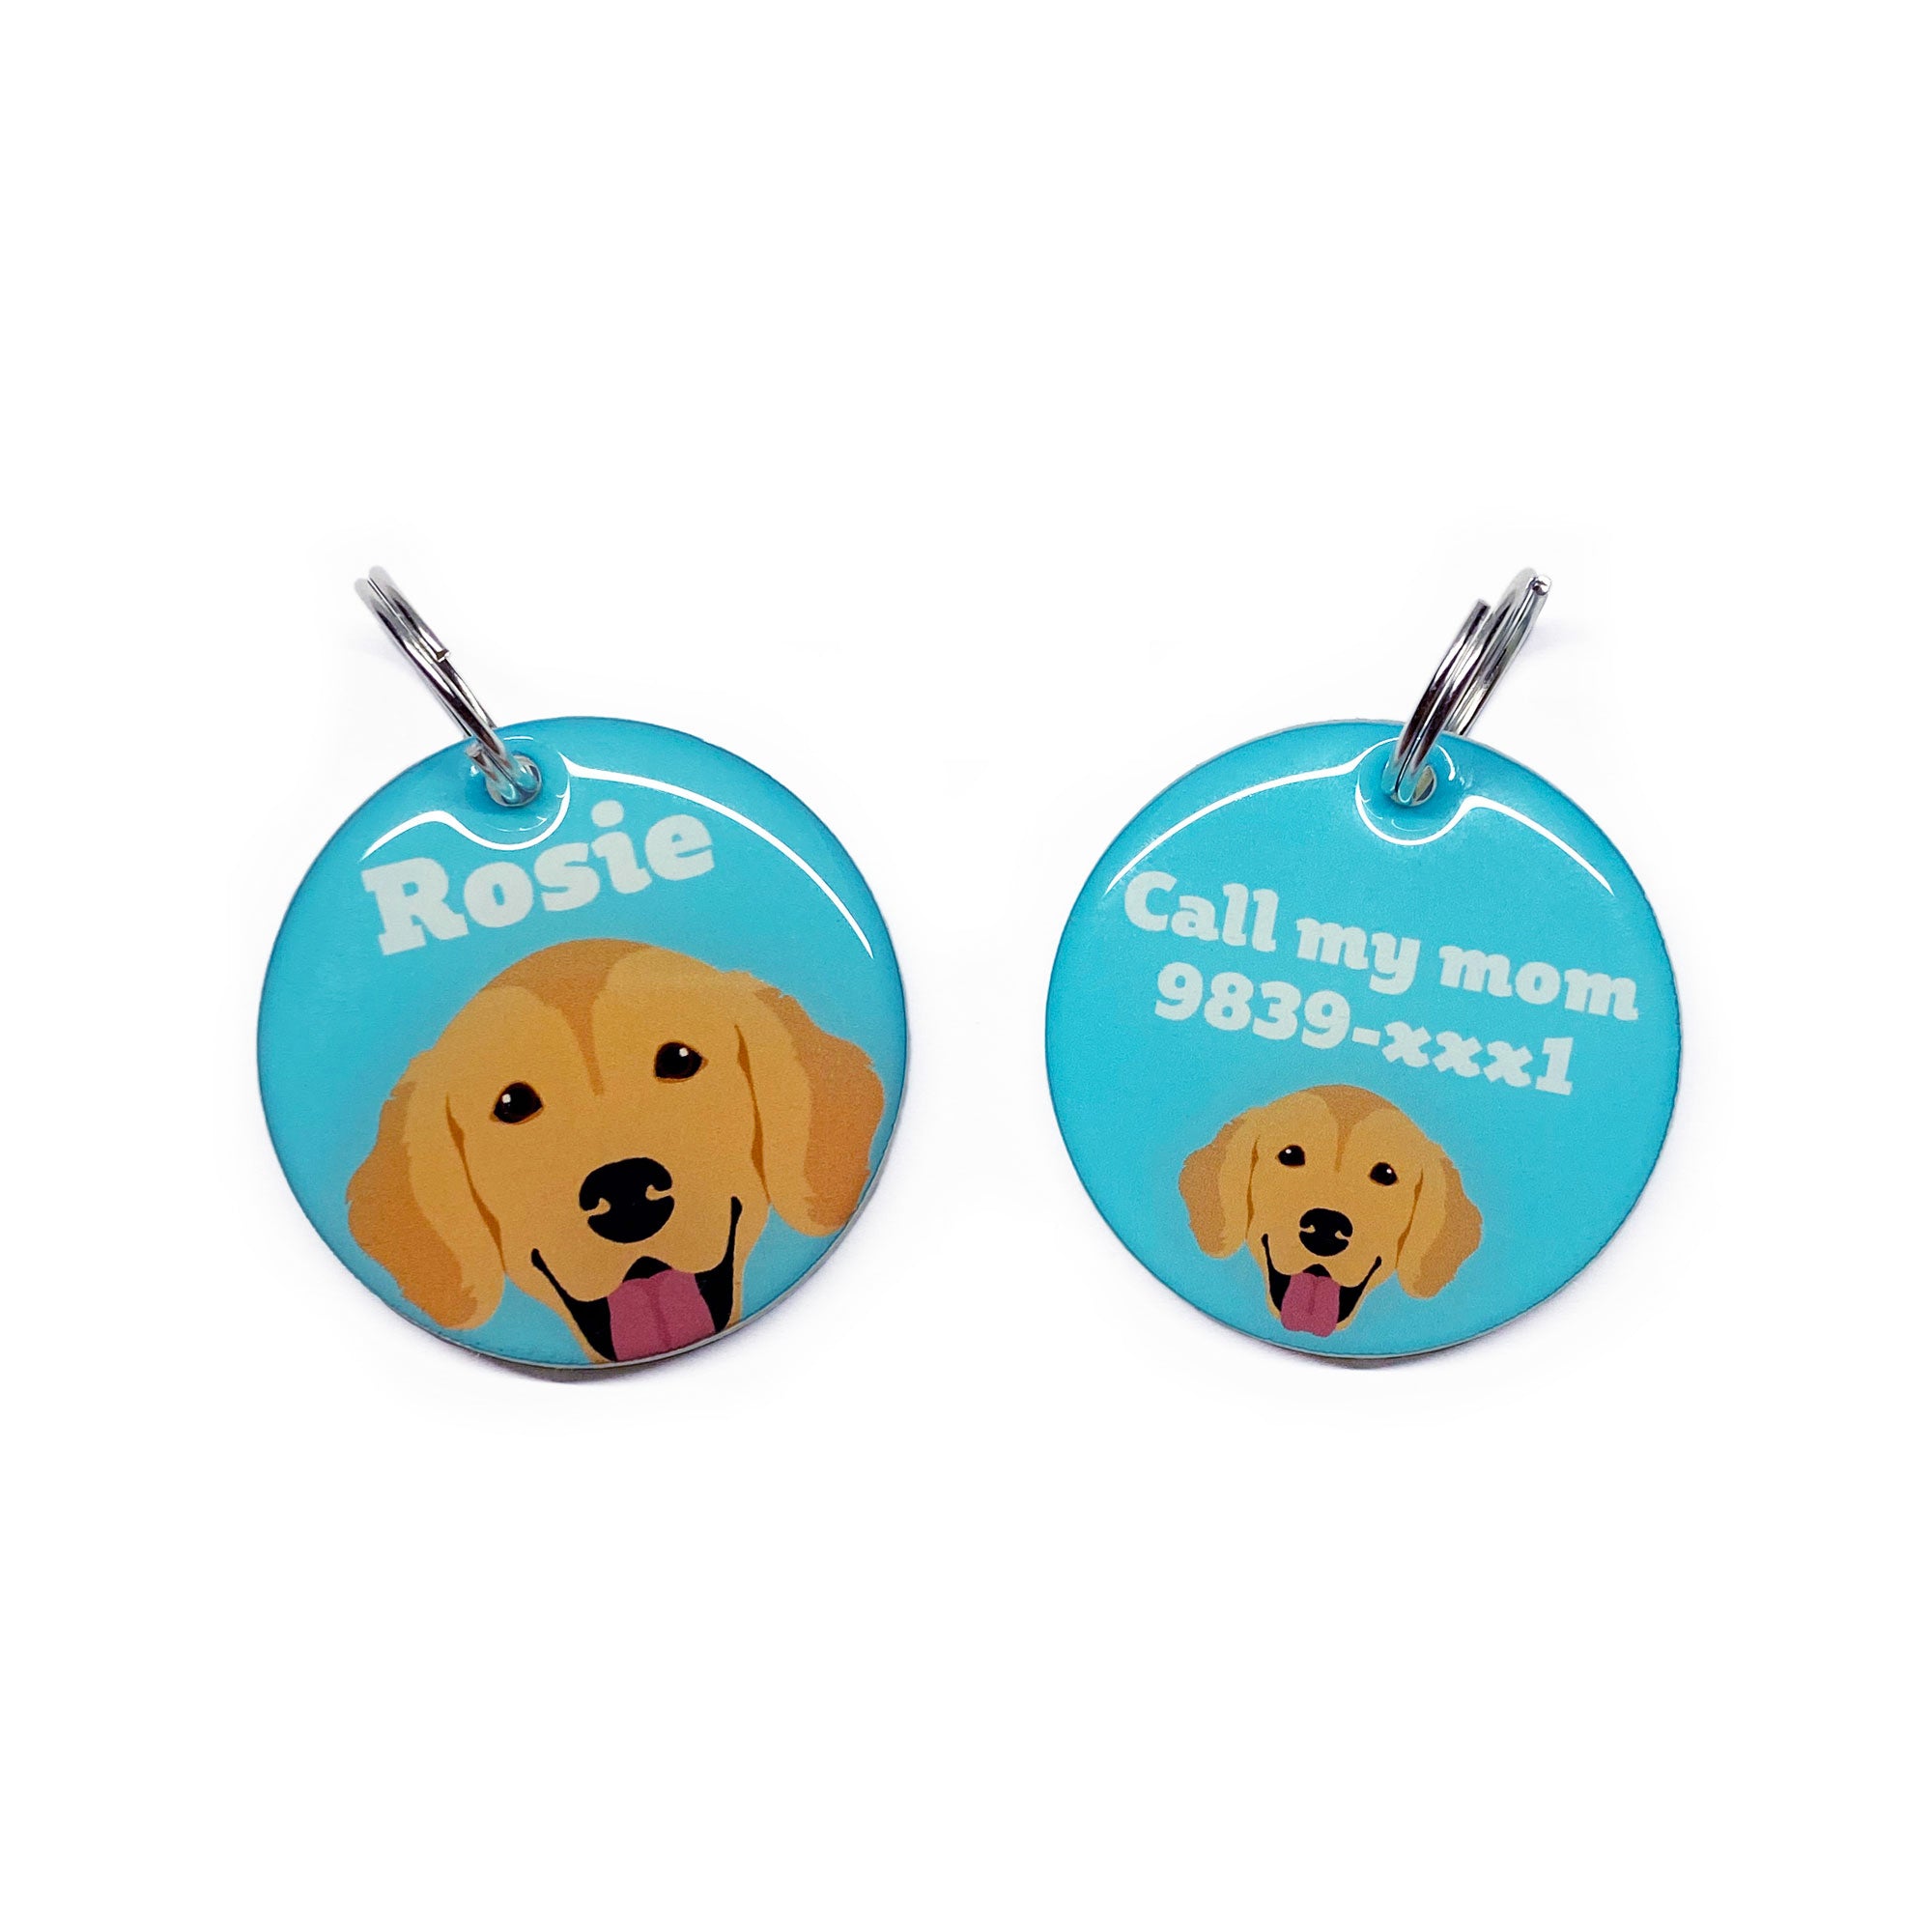 Golden Retriever - 2x Tags Dog Name Tags by Bashtags